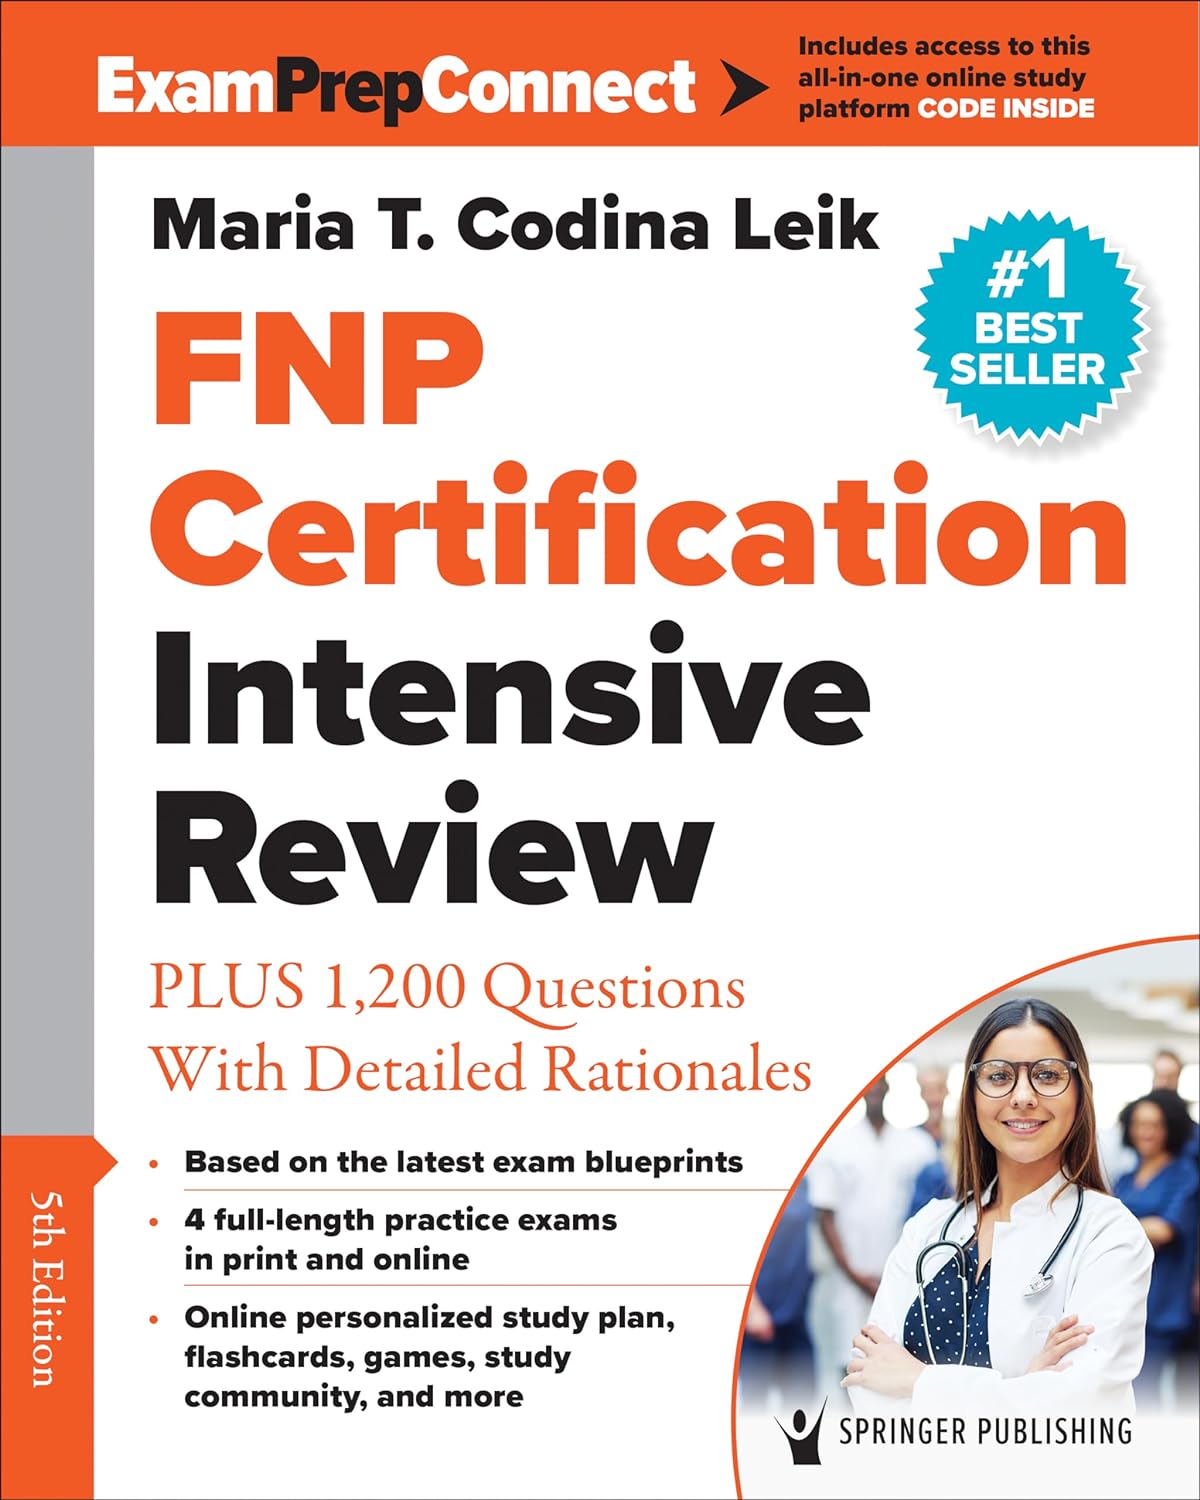 FNP Certification Intensive Review: PLUS 1,200 Questions With Detailed Rationales 5th Edition Fifth ed PDF by Maria T. Codina Leik MSN ARNP FNP-C AGPCNP-BC (Author)